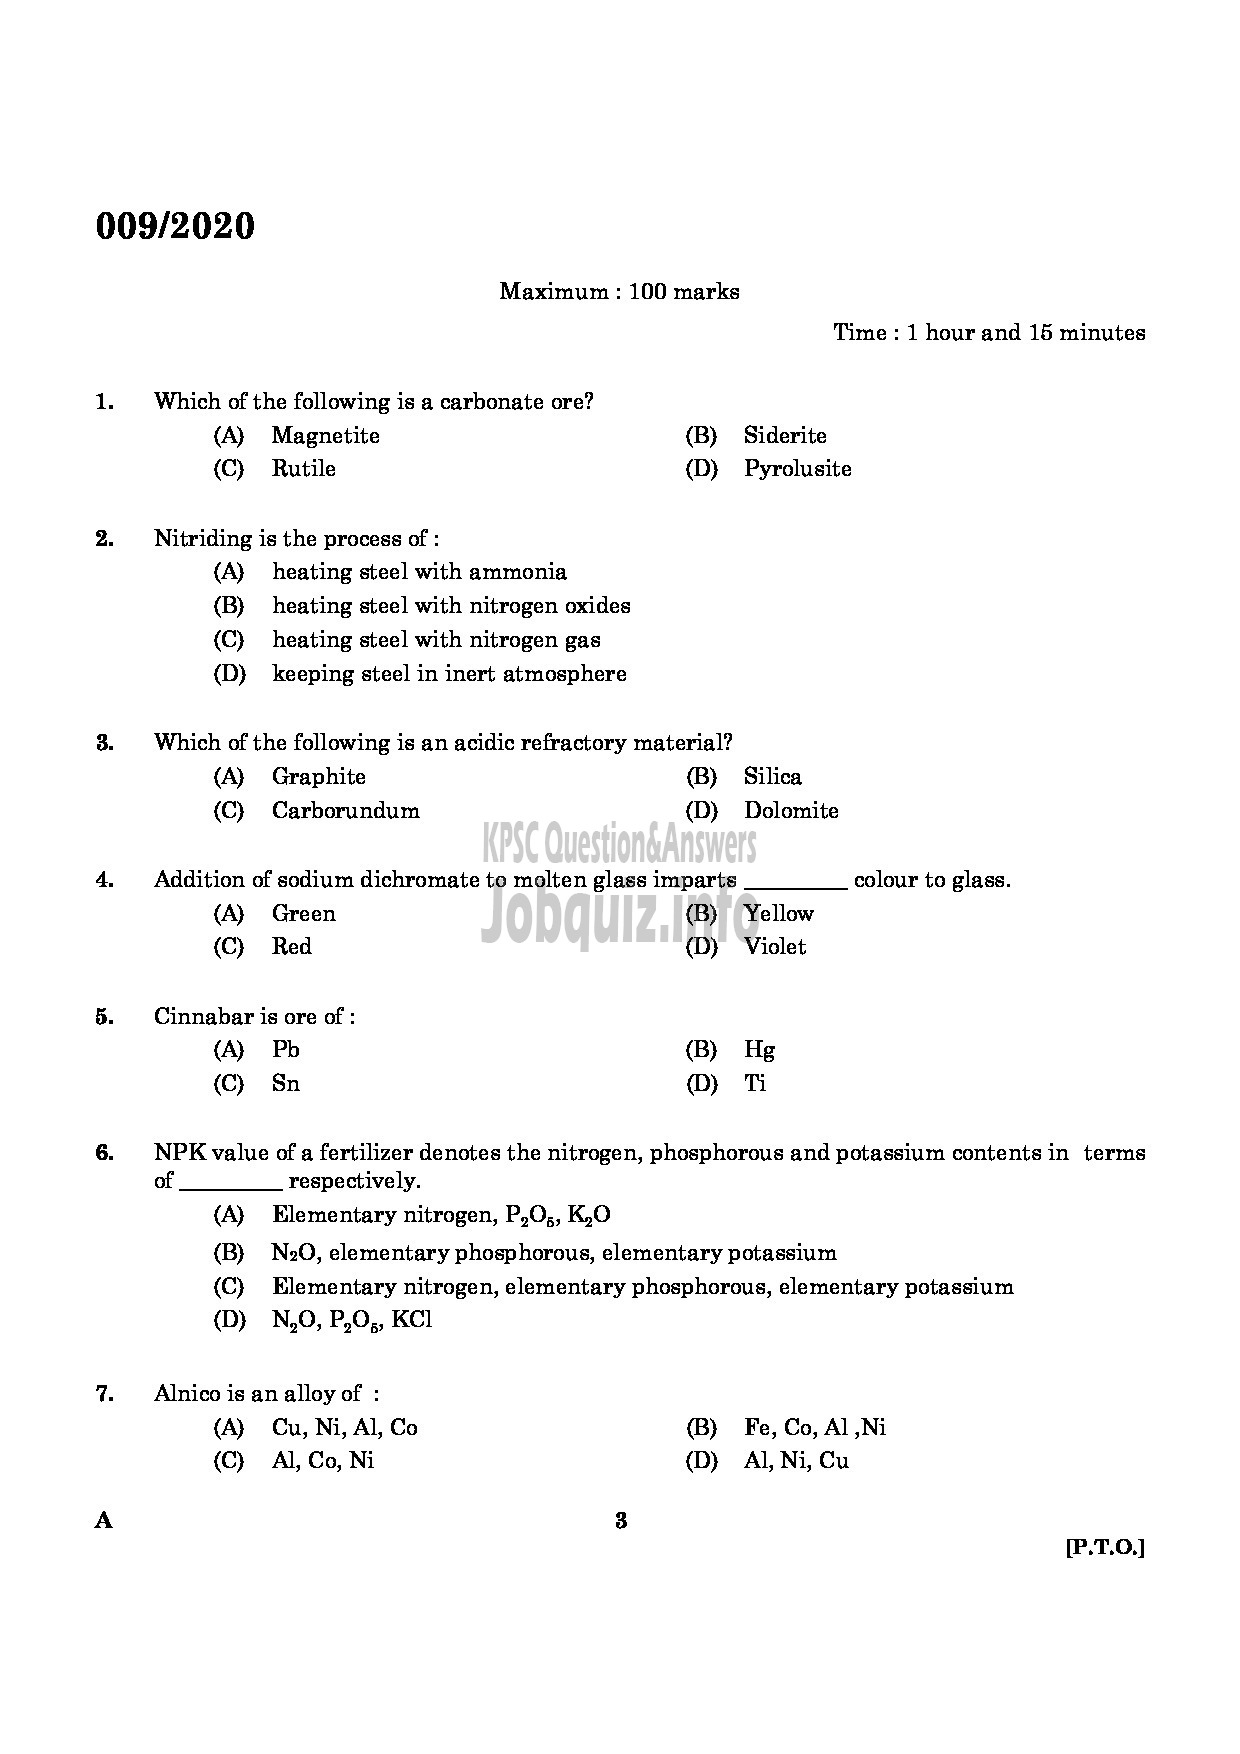 Kerala PSC Question Paper - CHEMIST IN FACTORIES AND BOILERS ENGLISH -1